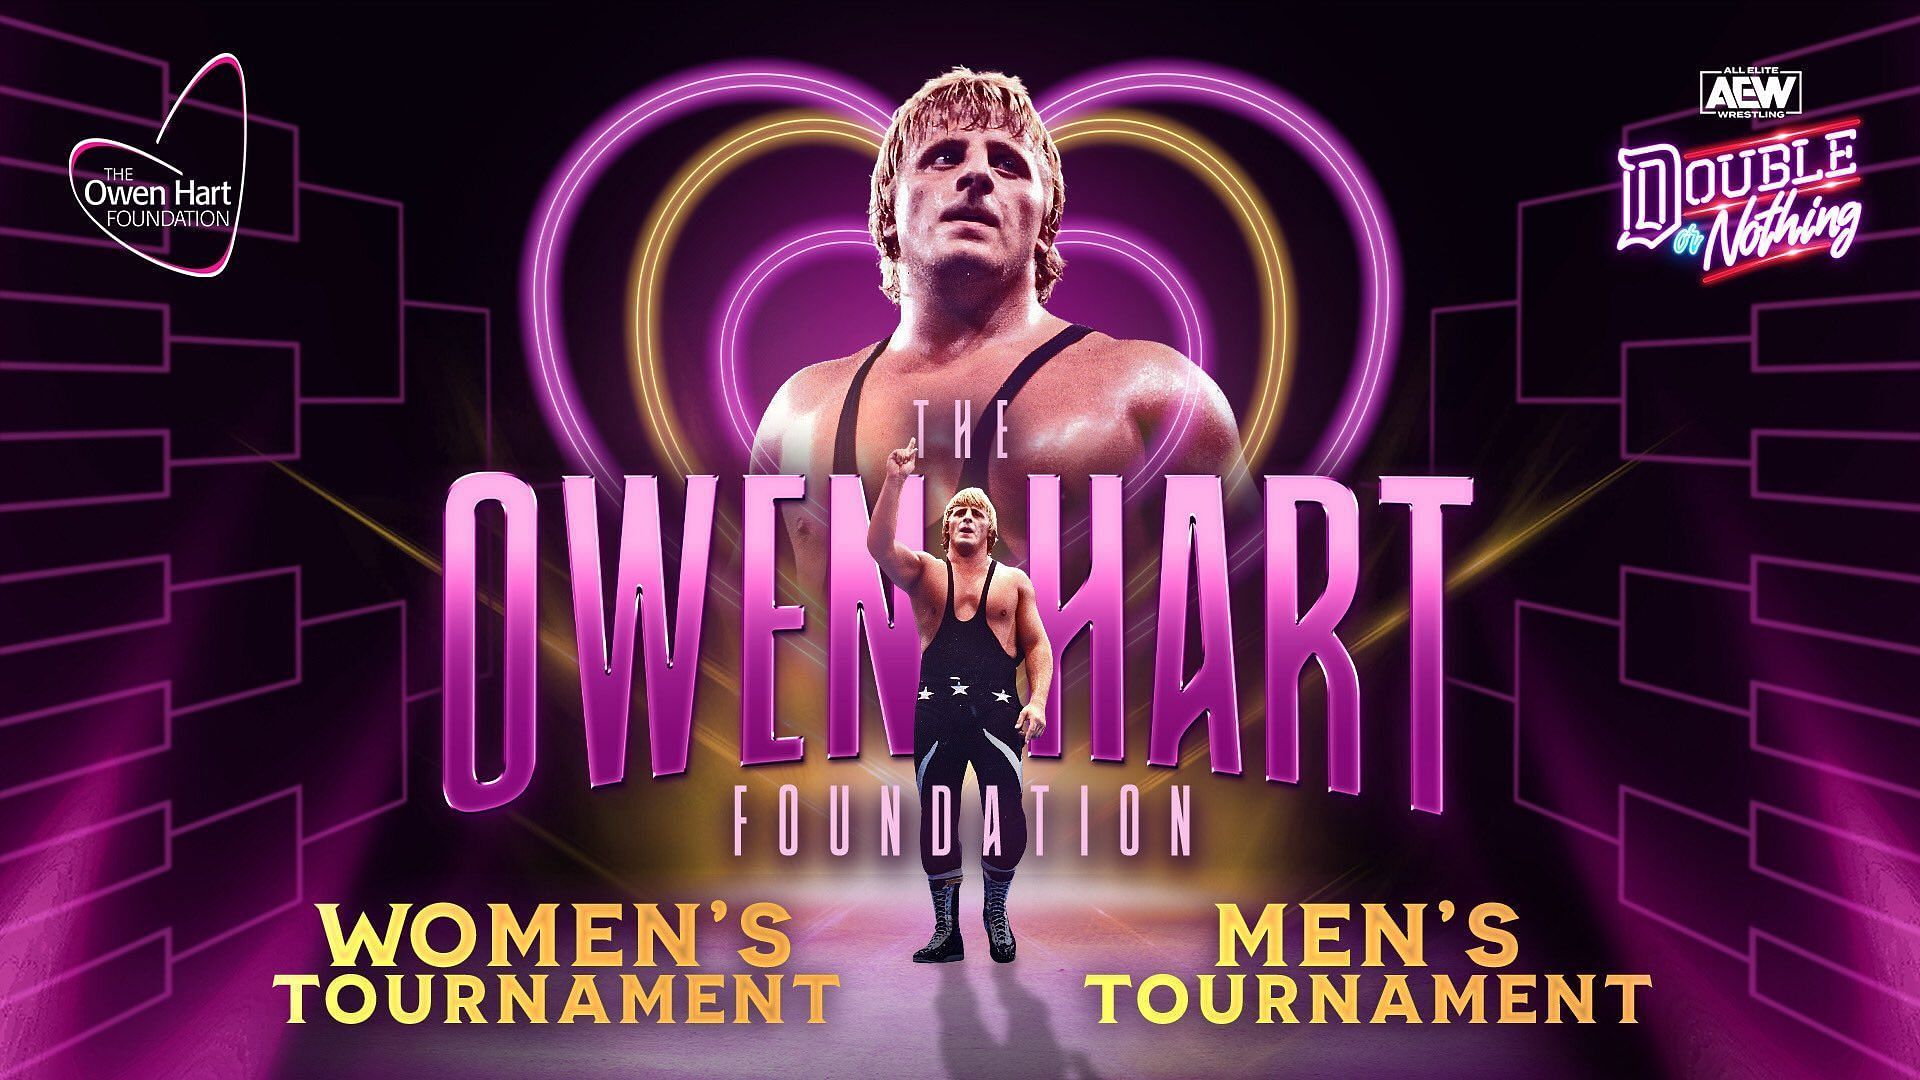 The tournament will conclude AEW Double or Nothing 2022.